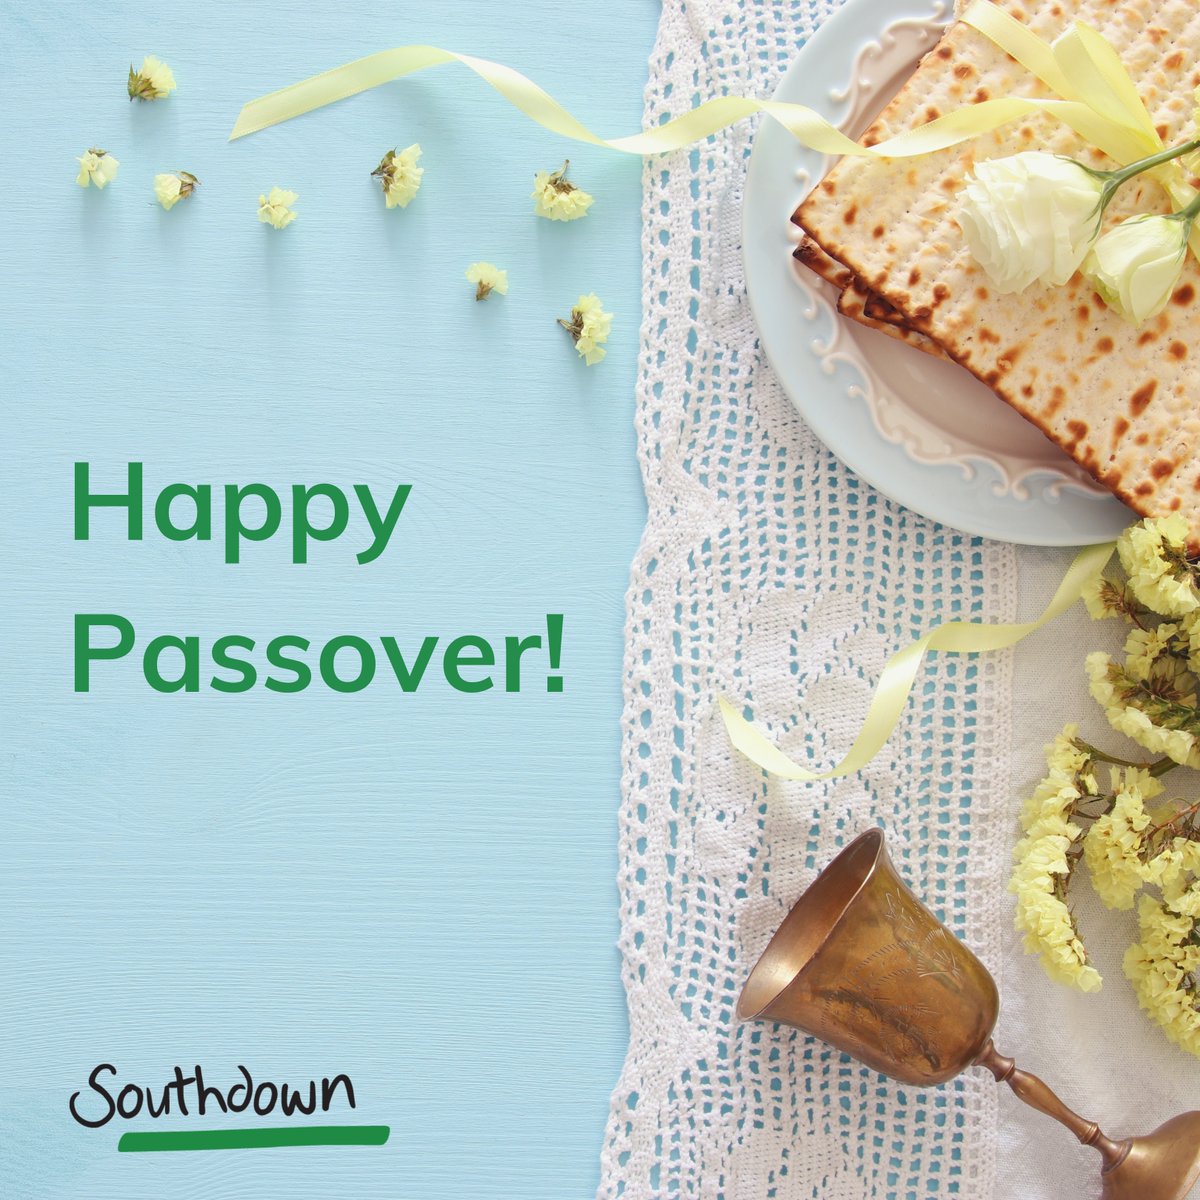 We would like to wish a Happy Passover to all those celebrating! #Passover